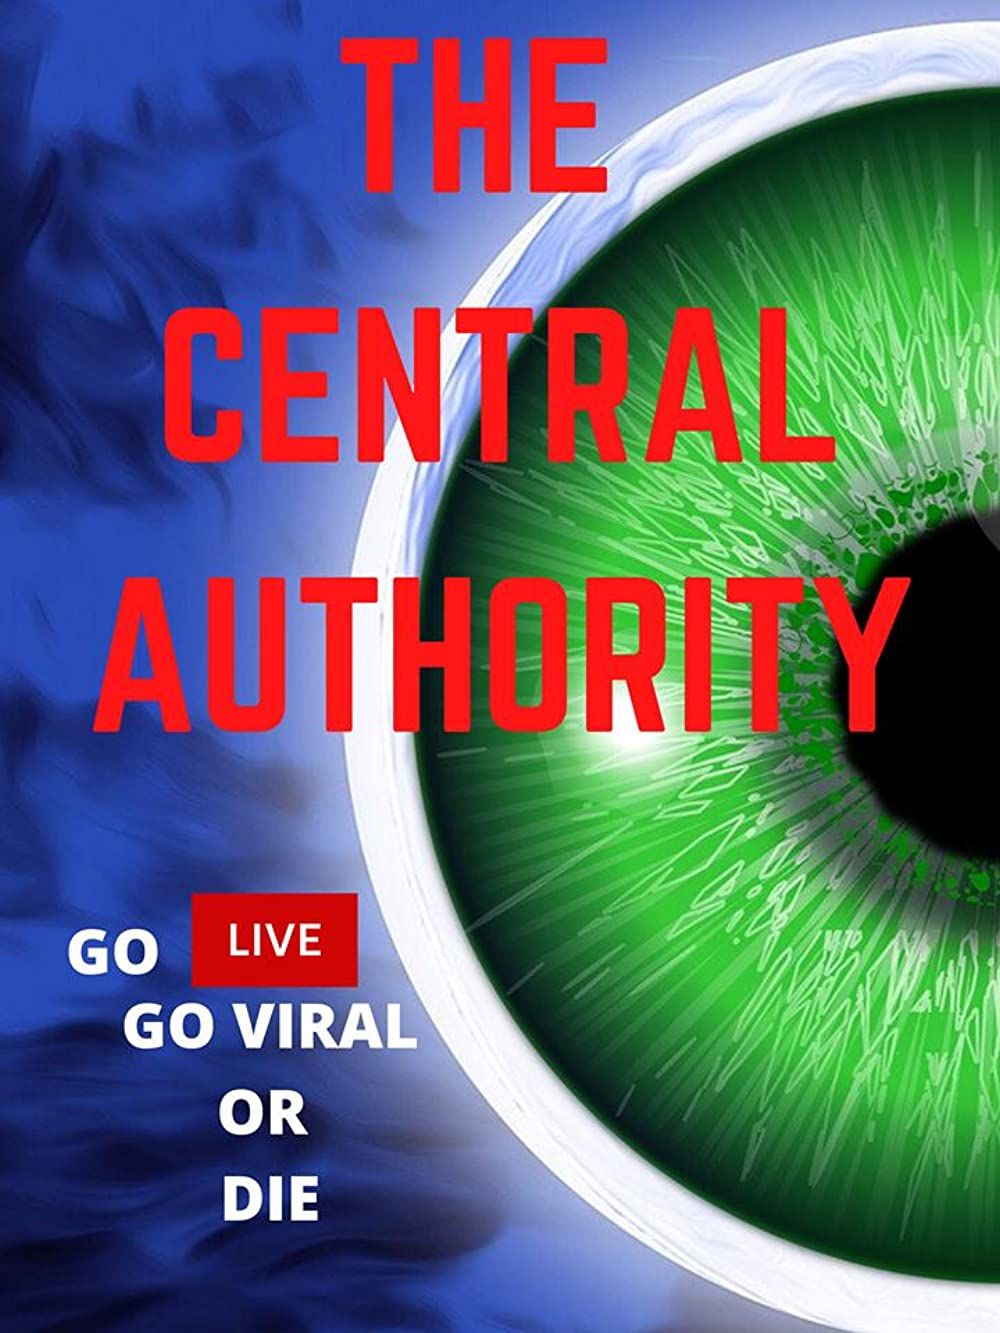 Central Authority